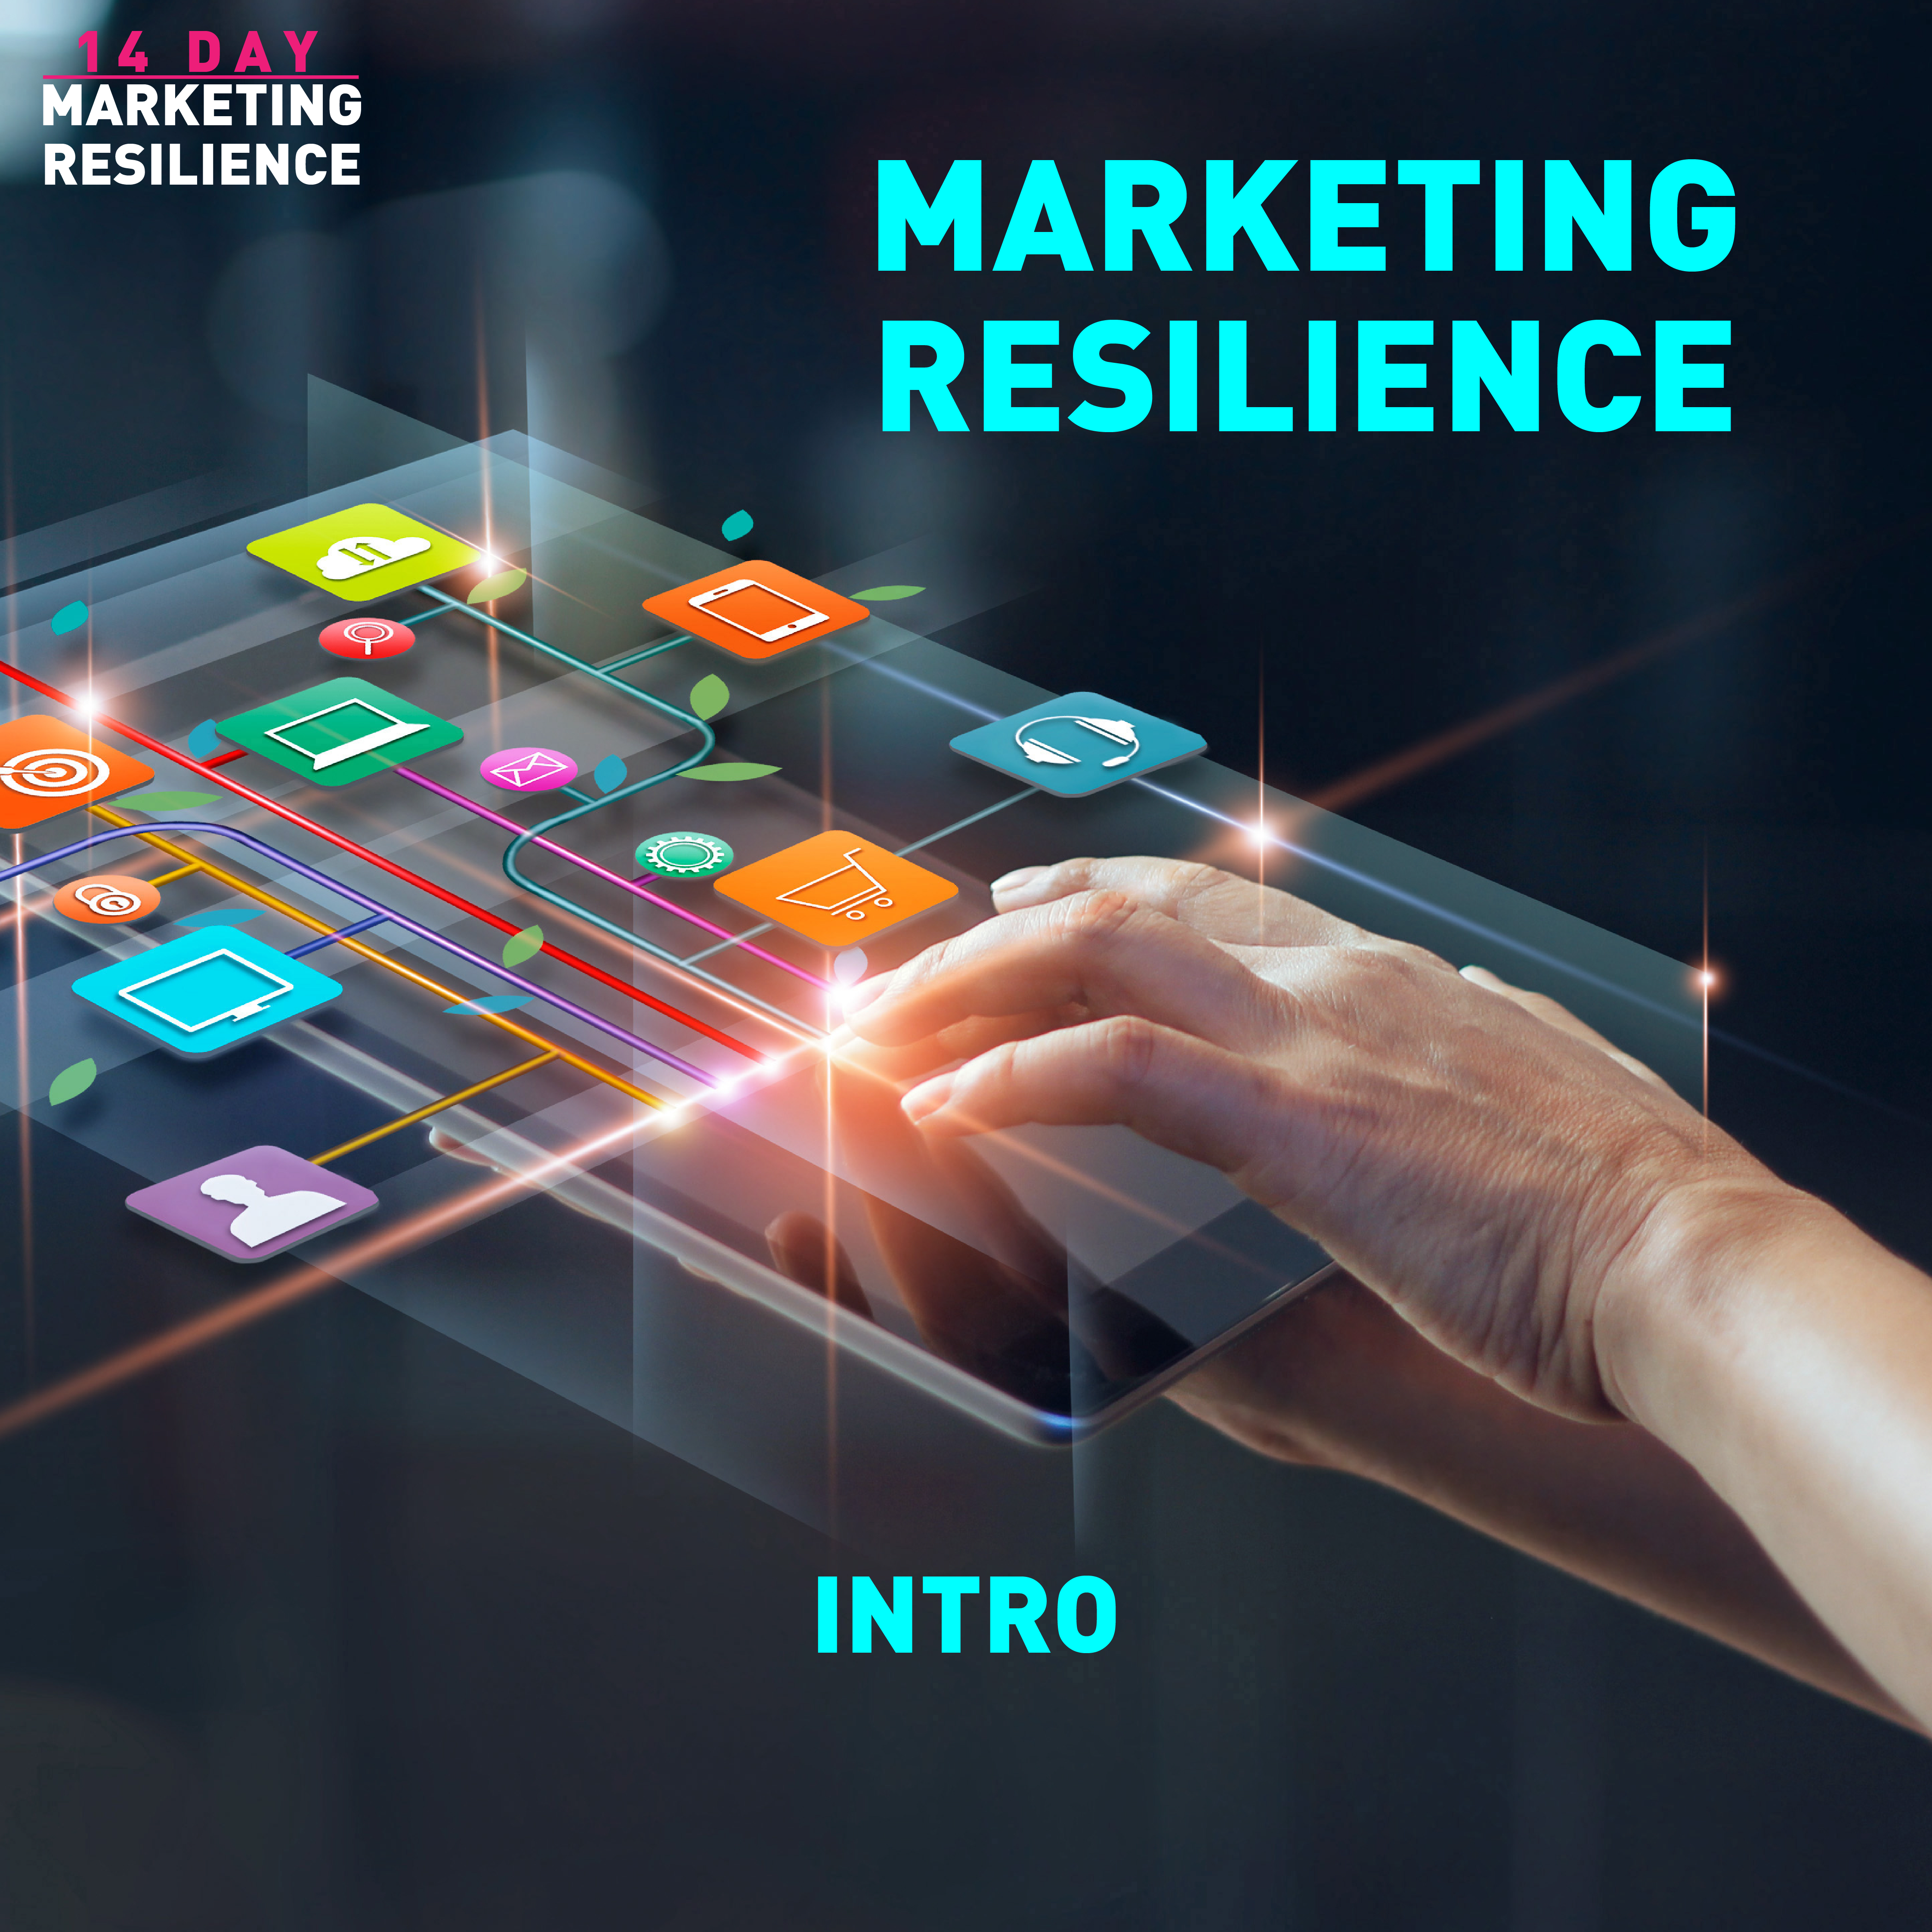 MARKETING RESILIENCE introduction 14 day challenge